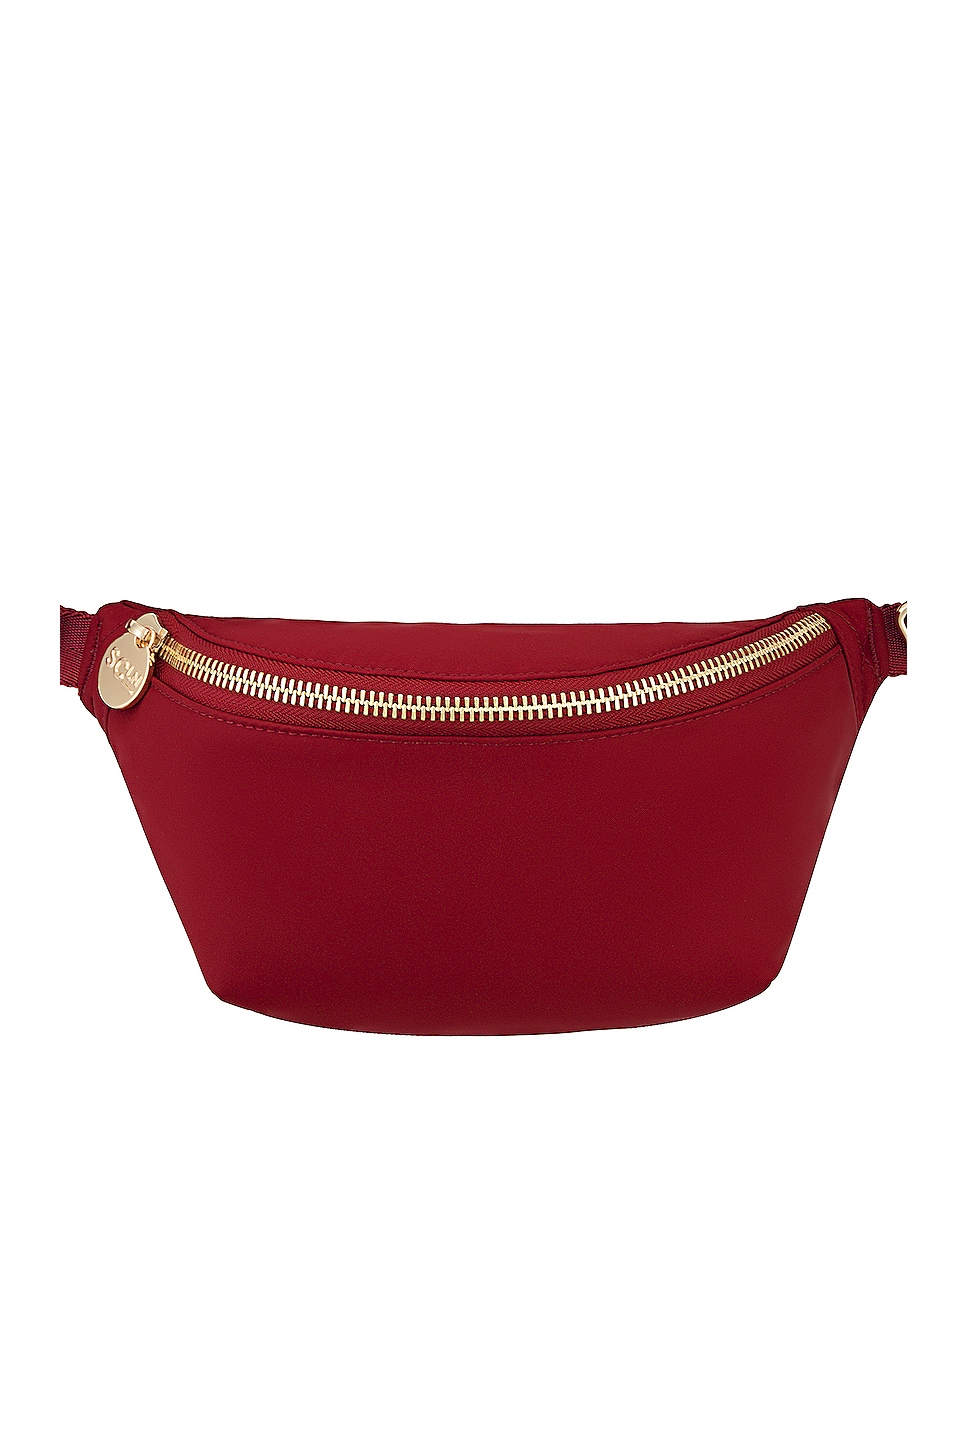 Image 1 of Classic Fanny Pack in Wild Plum